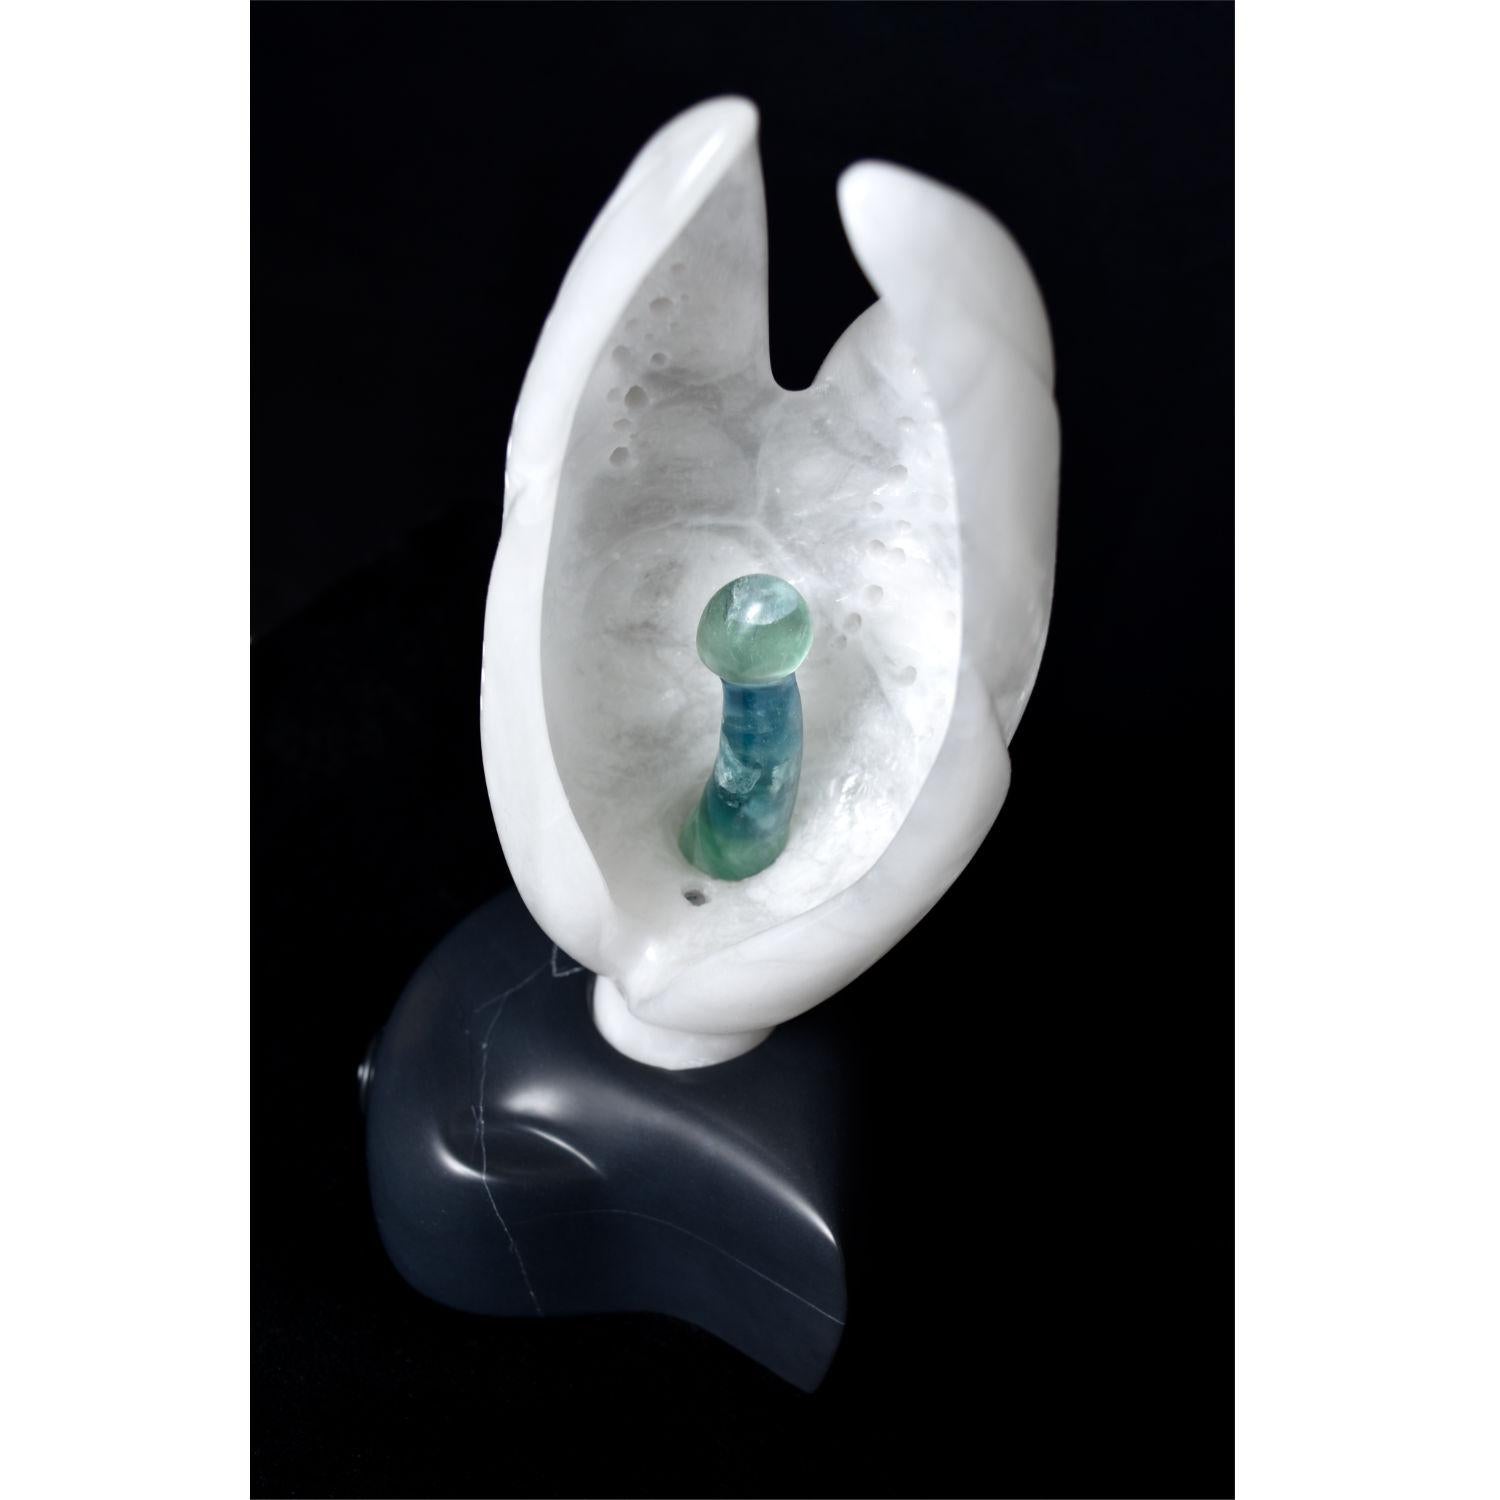 American Chrysalis White Alabaster Ebony Soapstone UV Lighted Metaphysical Sculpture For Sale